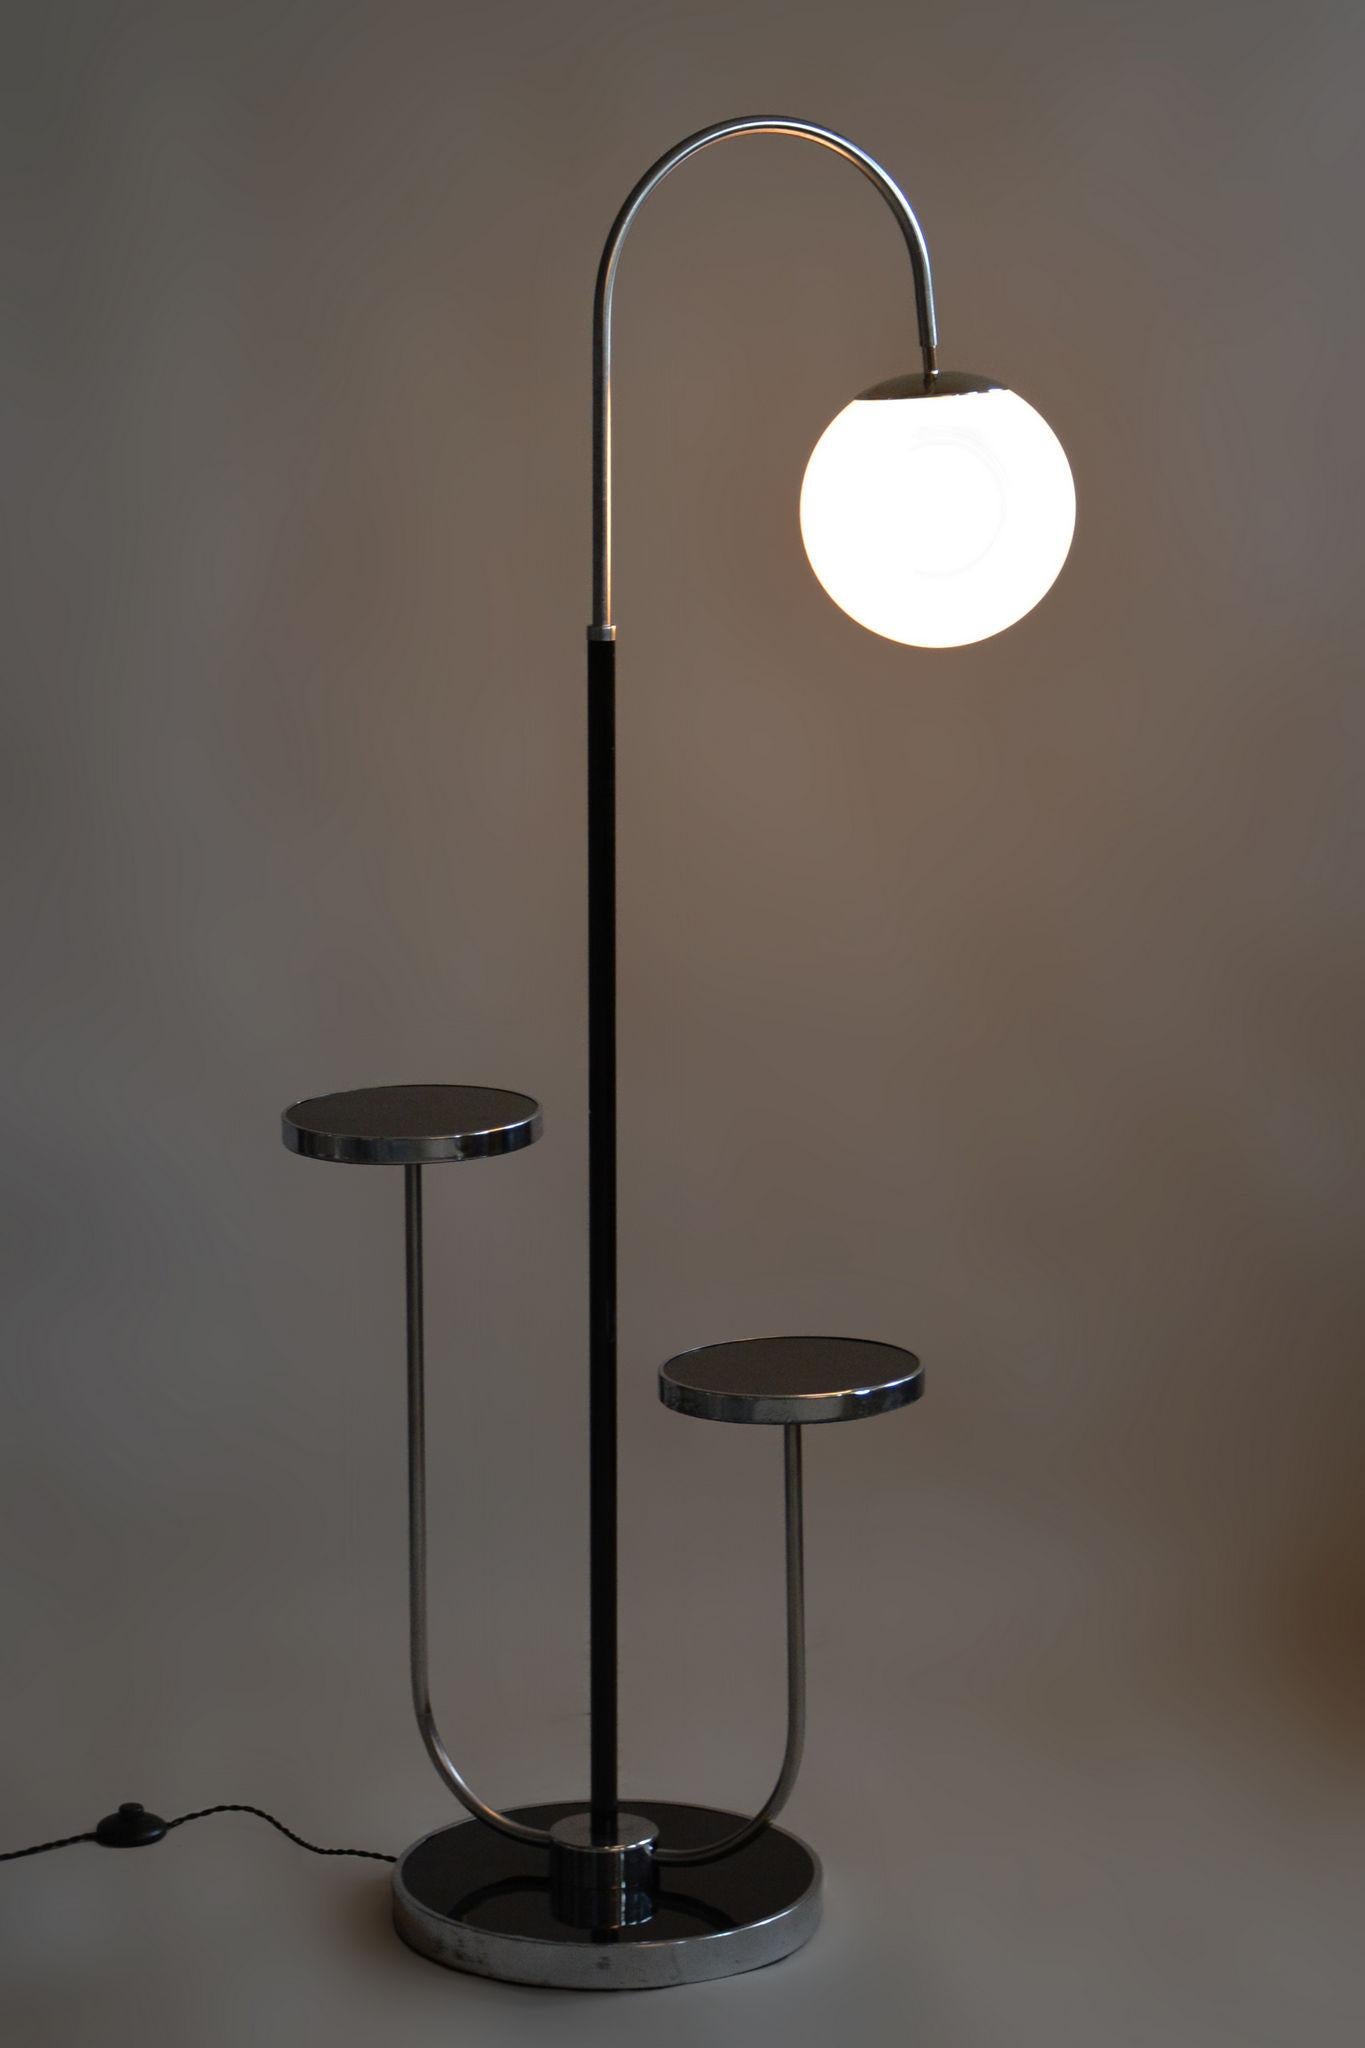 Restored Bauhaus Floor Lamp Designed By Jindrich Halabala.

Designer: Jindrich Halabala
Maker: UP Zavody
Material: Chrome-plated Steel, Opal Glass, Lacquered Wood
Source: Czechia 
Period: 1930-1939
The diameter of the ball is 25cm.

The chrome parts